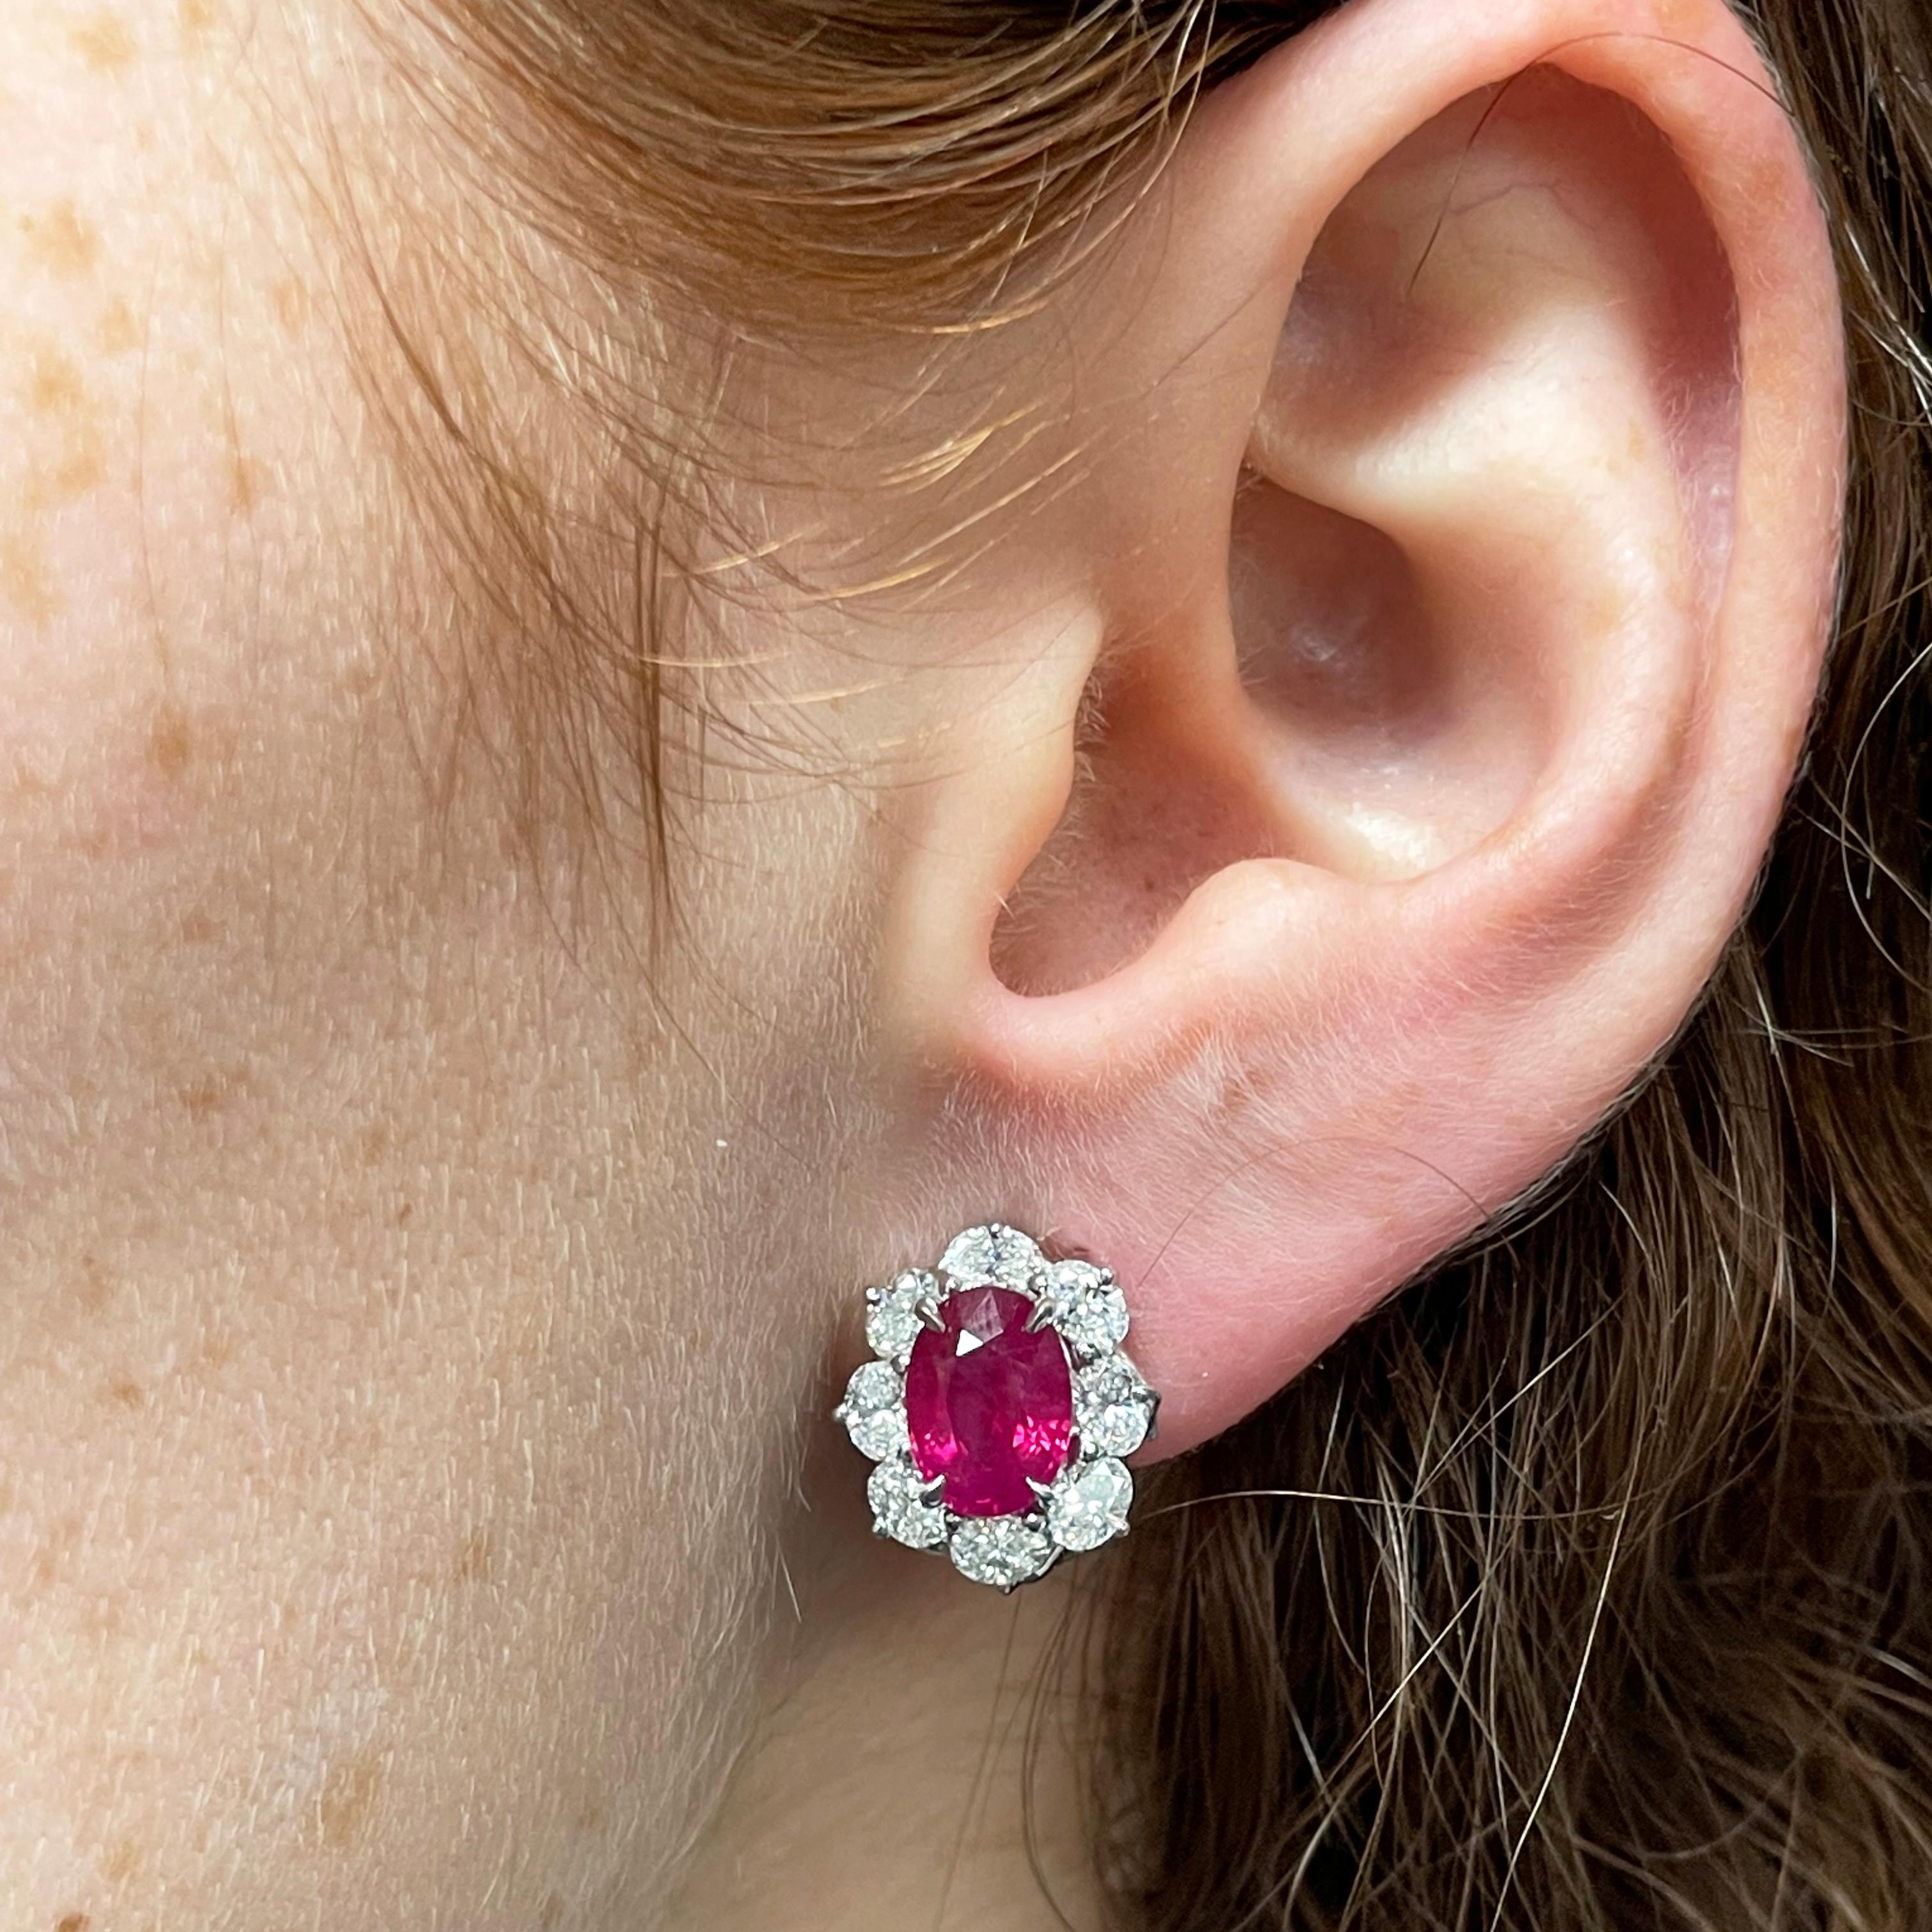 Oscar Heyman platinum 'entourage' earrings contain 4.09tcw Burma Rubies (GIA report) and 16 oval diamonds weighing 2.10tcw (F-G/VS quality). The face of the earrings measures 15mm tall by 13mm wide. They are stamped with the makers mark, PLAT, and